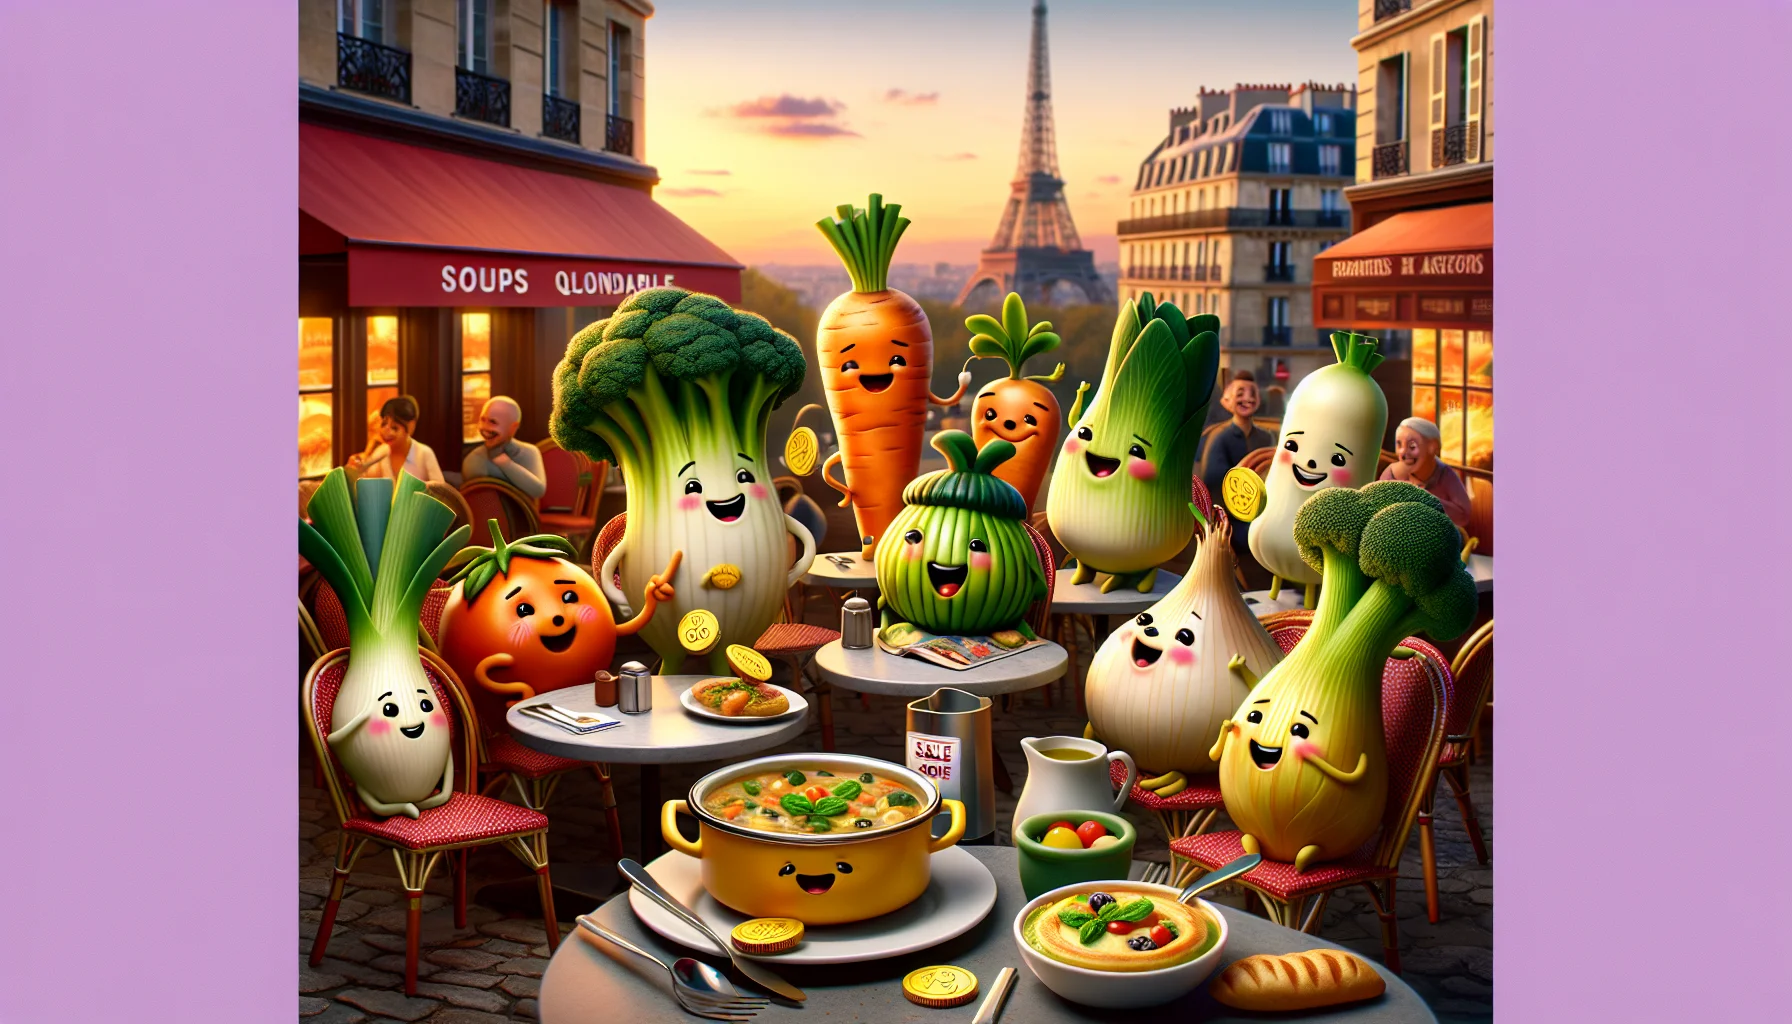 An amusing and realistic portrayal of a variety of French vegetable dishes, showcased humorously to encourage people to eat healthily on a budget. Picture a bunch of animated vegetables with cute, friendly faces, gathered around a cafe scene in the heart of Paris. They're engaged in conversation, each exhibiting a different personality reflective of their unique flavors. There's Ratatouille flipping a coin, indicating it's affordable, a blushing soup pot holding a 'Sale' sign, and a Leek Quiche with a budget planner. In the background, the Eiffel tower and a Parisian sunset add to the warm, delightful atmosphere.